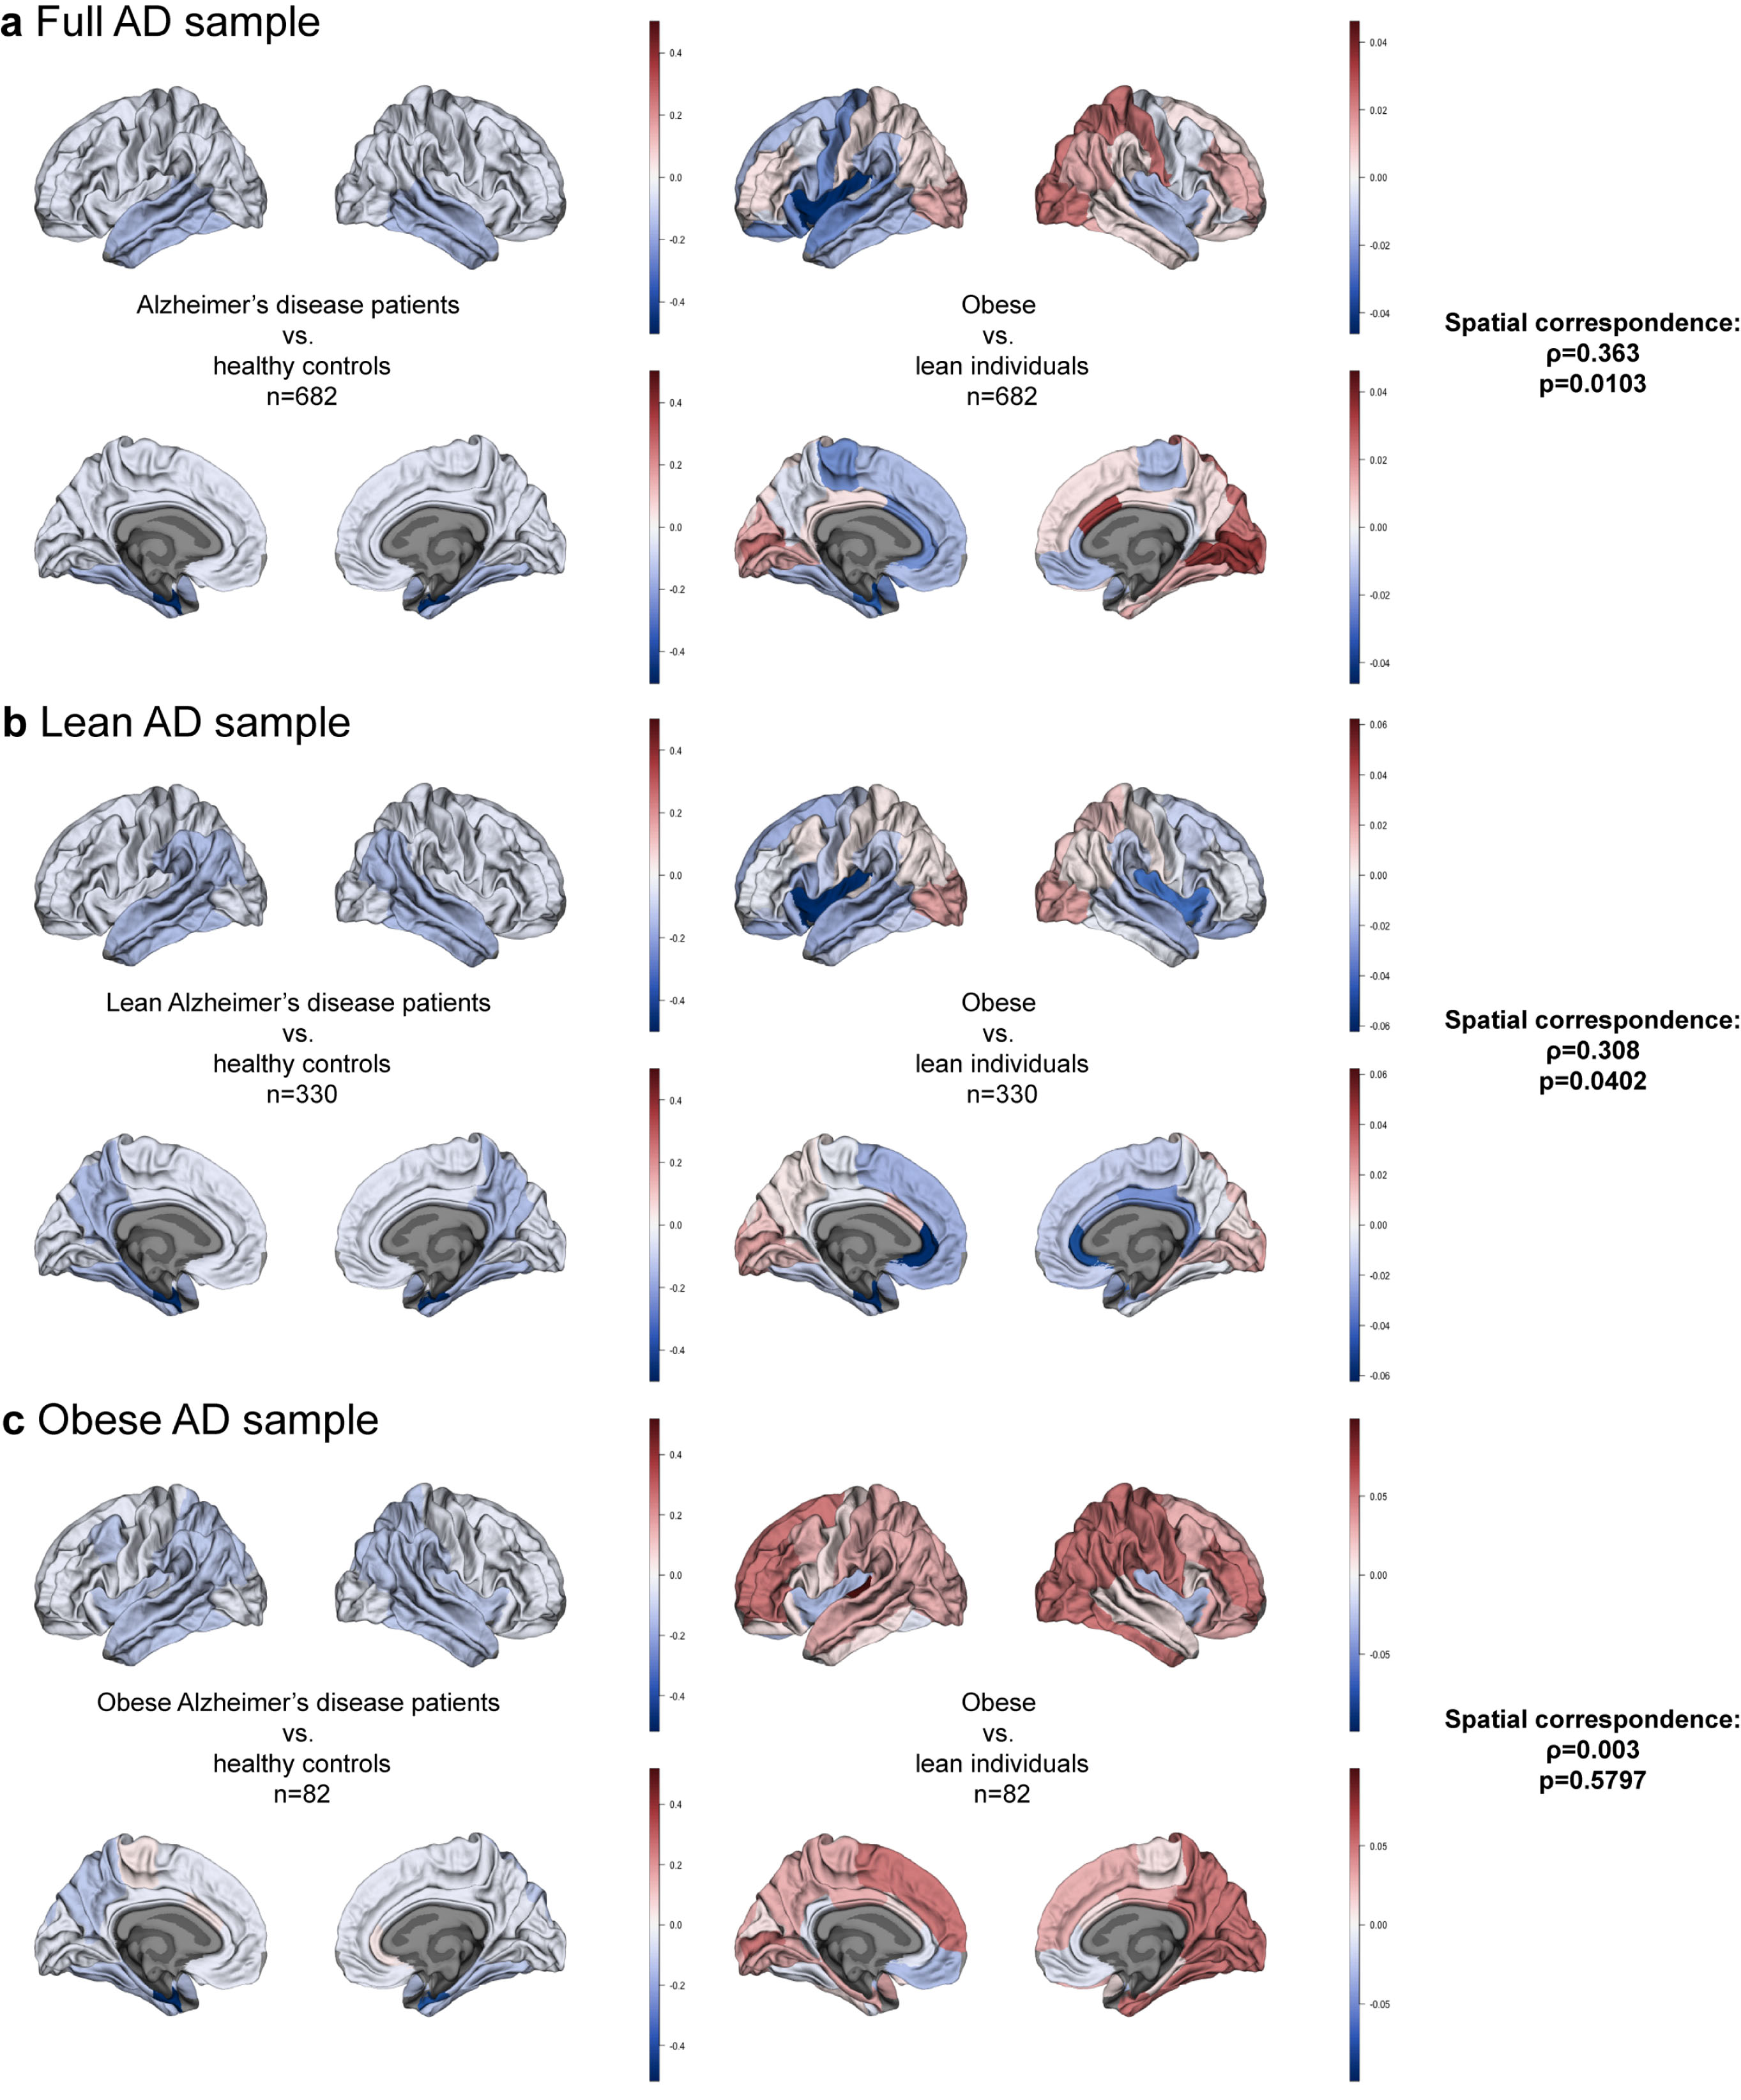 Brain maps of a) Alzheimer’s disease (AD) and obesity in the full sample; b) AD and obesity in the sample of lean AD patients and other matched samples; c) AD and obesity in the sample of obese AD patients and other matched samples. Color bars depict β estimates.